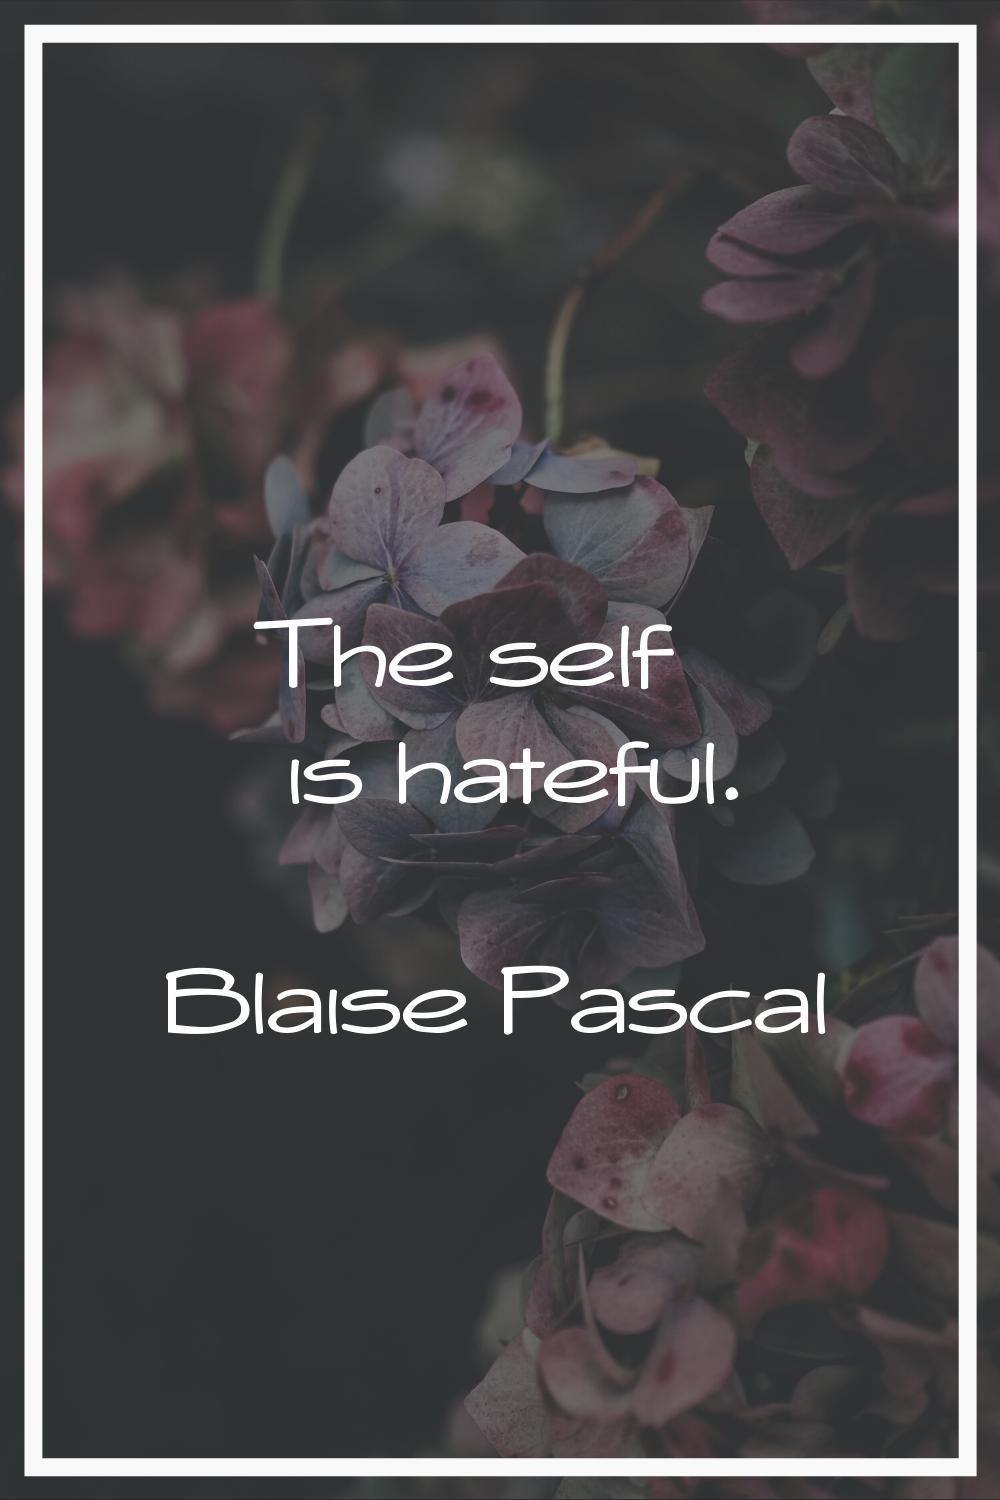 The self is hateful.